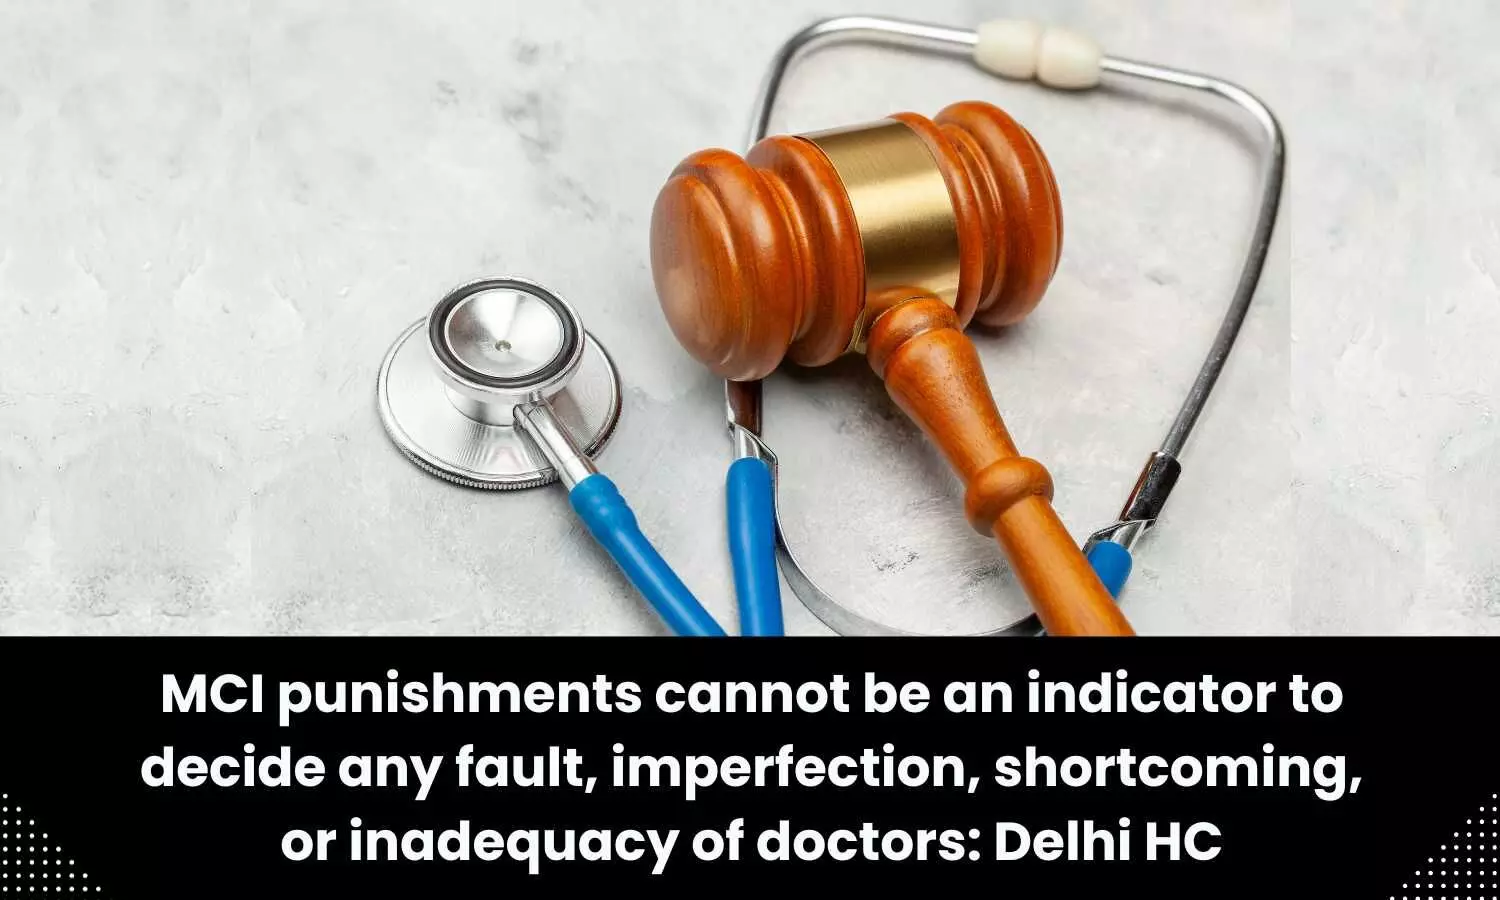 MCI punishments cannot be an indicator to decide any faults: Delhi HC